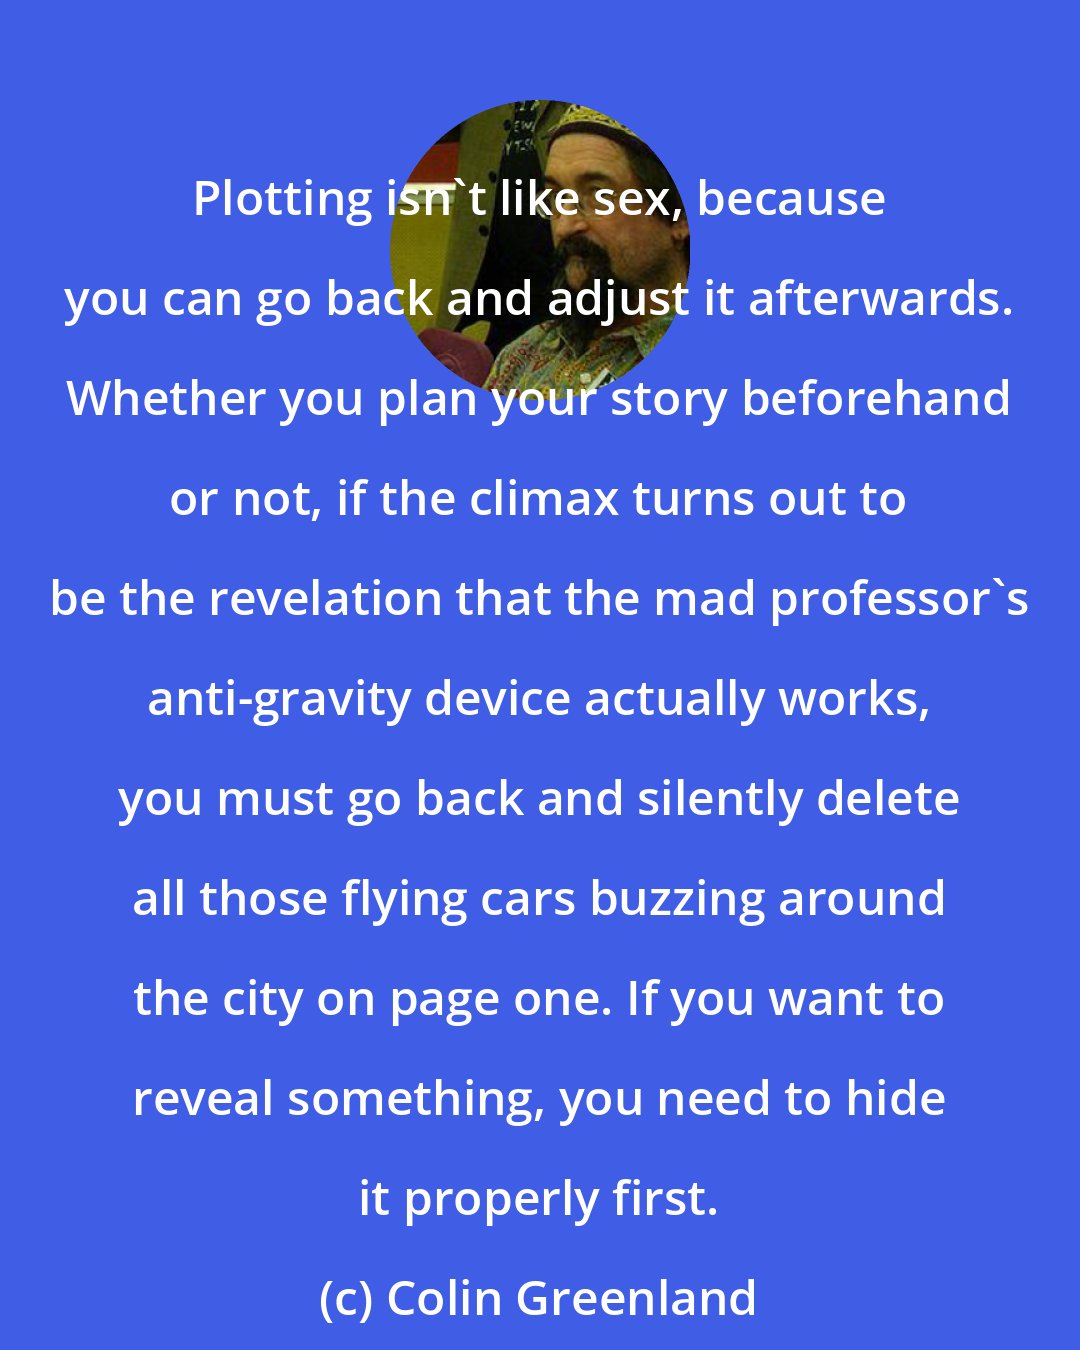 Colin Greenland: Plotting isn't like sex, because you can go back and adjust it afterwards. Whether you plan your story beforehand or not, if the climax turns out to be the revelation that the mad professor's anti-gravity device actually works, you must go back and silently delete all those flying cars buzzing around the city on page one. If you want to reveal something, you need to hide it properly first.